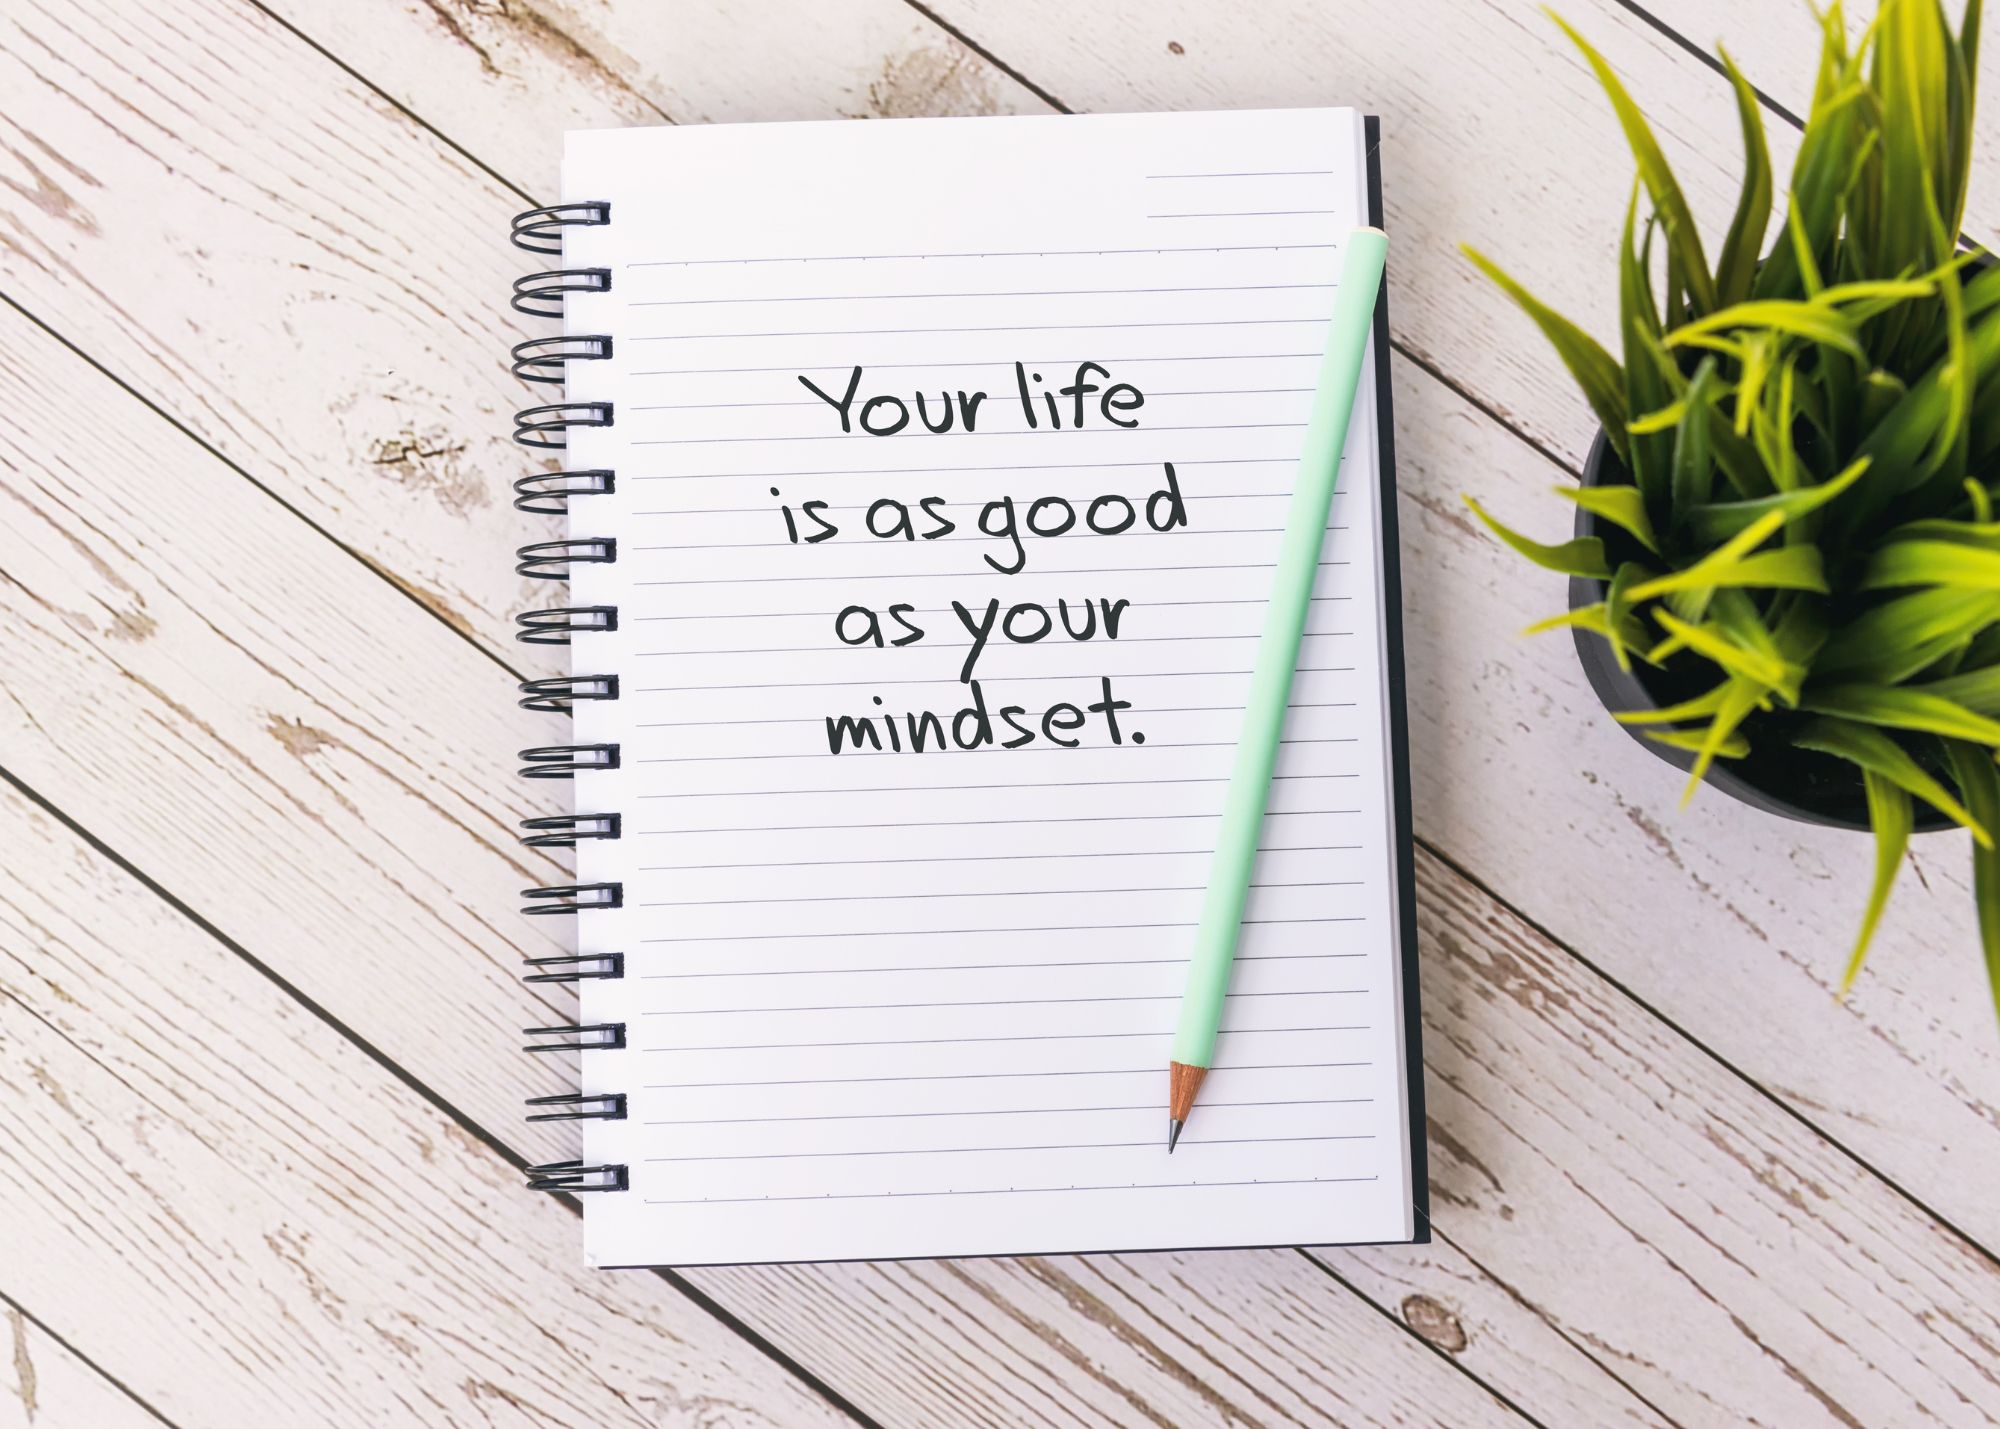 A notebook on a white desk with a message written on the page that says, "Your life is as good as your mindset." An aqua-colored pencil is laid across the notebook, which is on the desk next to a plant.